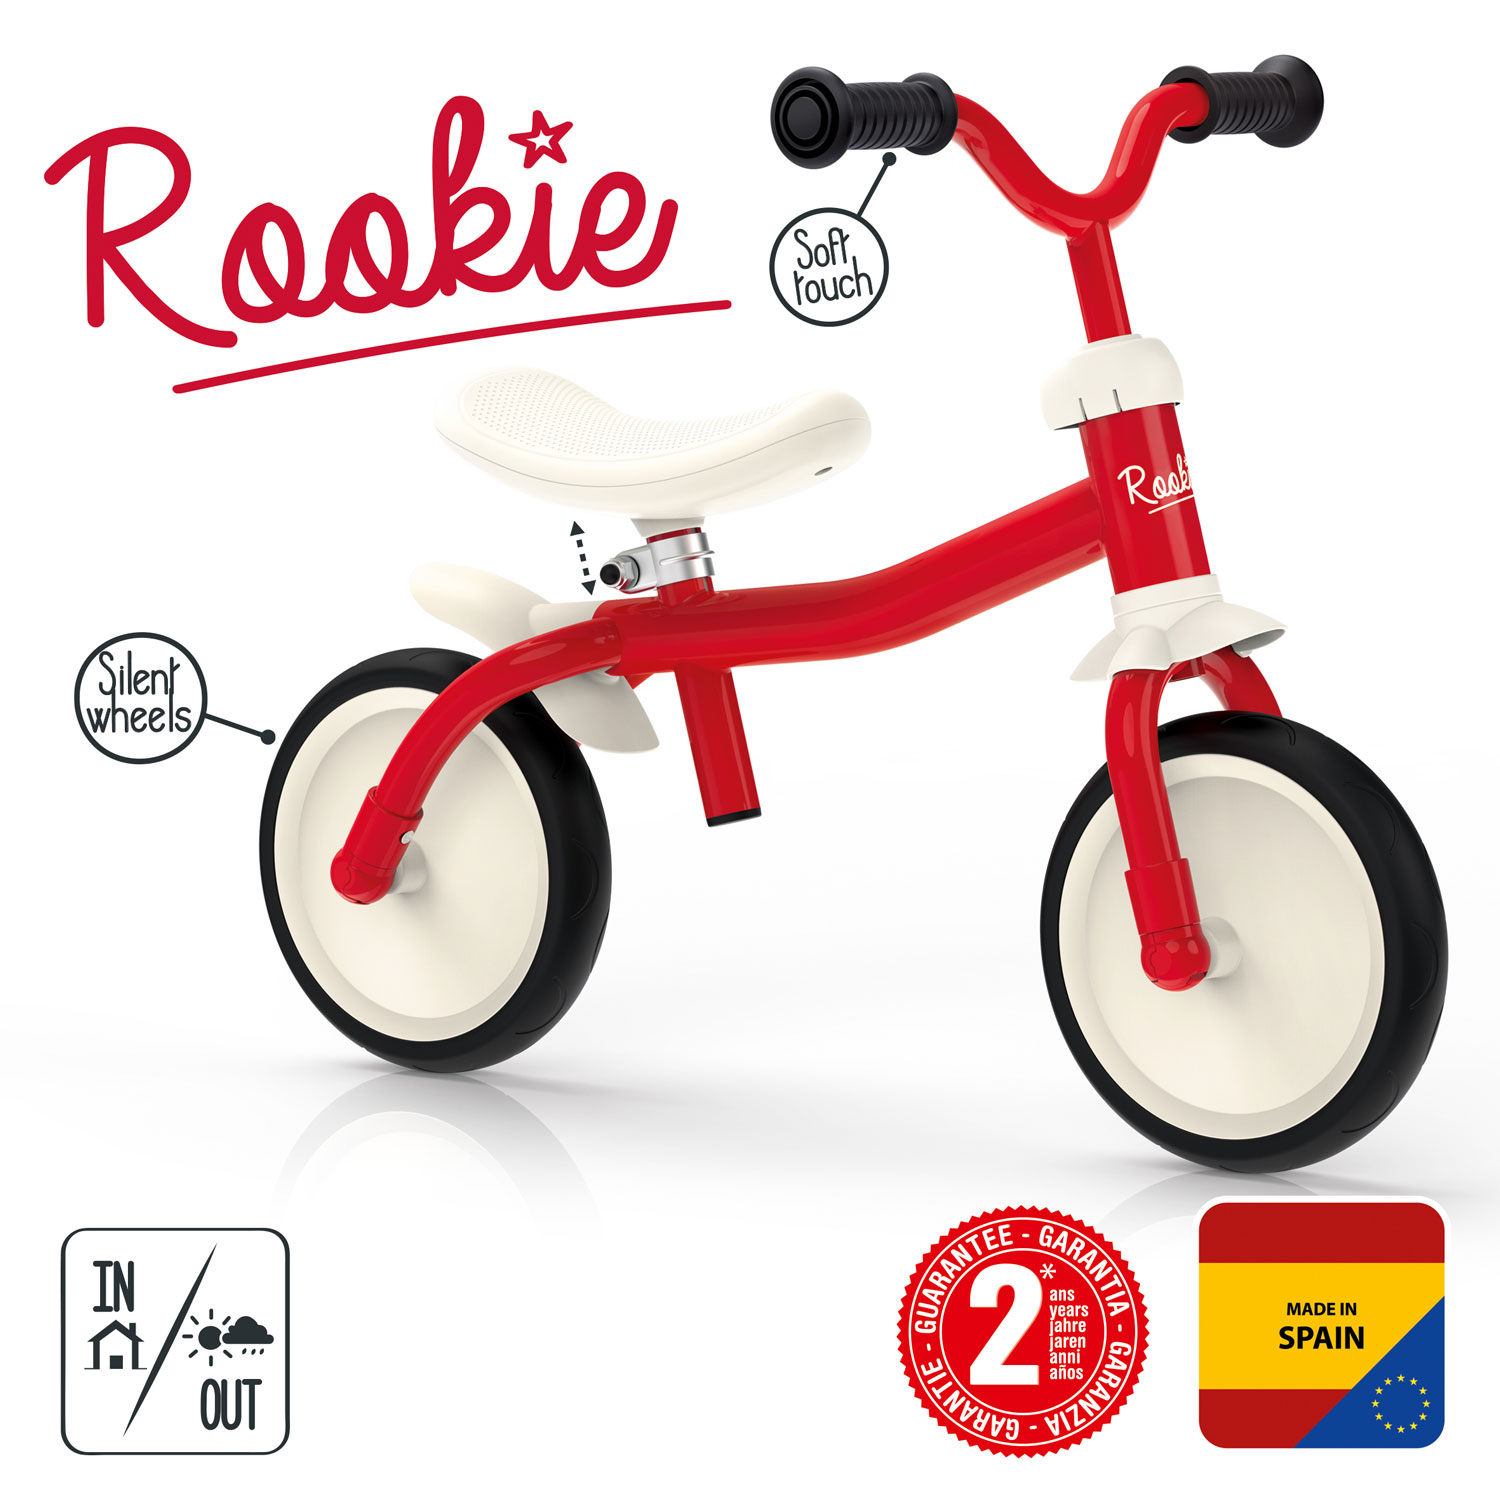 Draisienne Smoby Rookie Draisienne